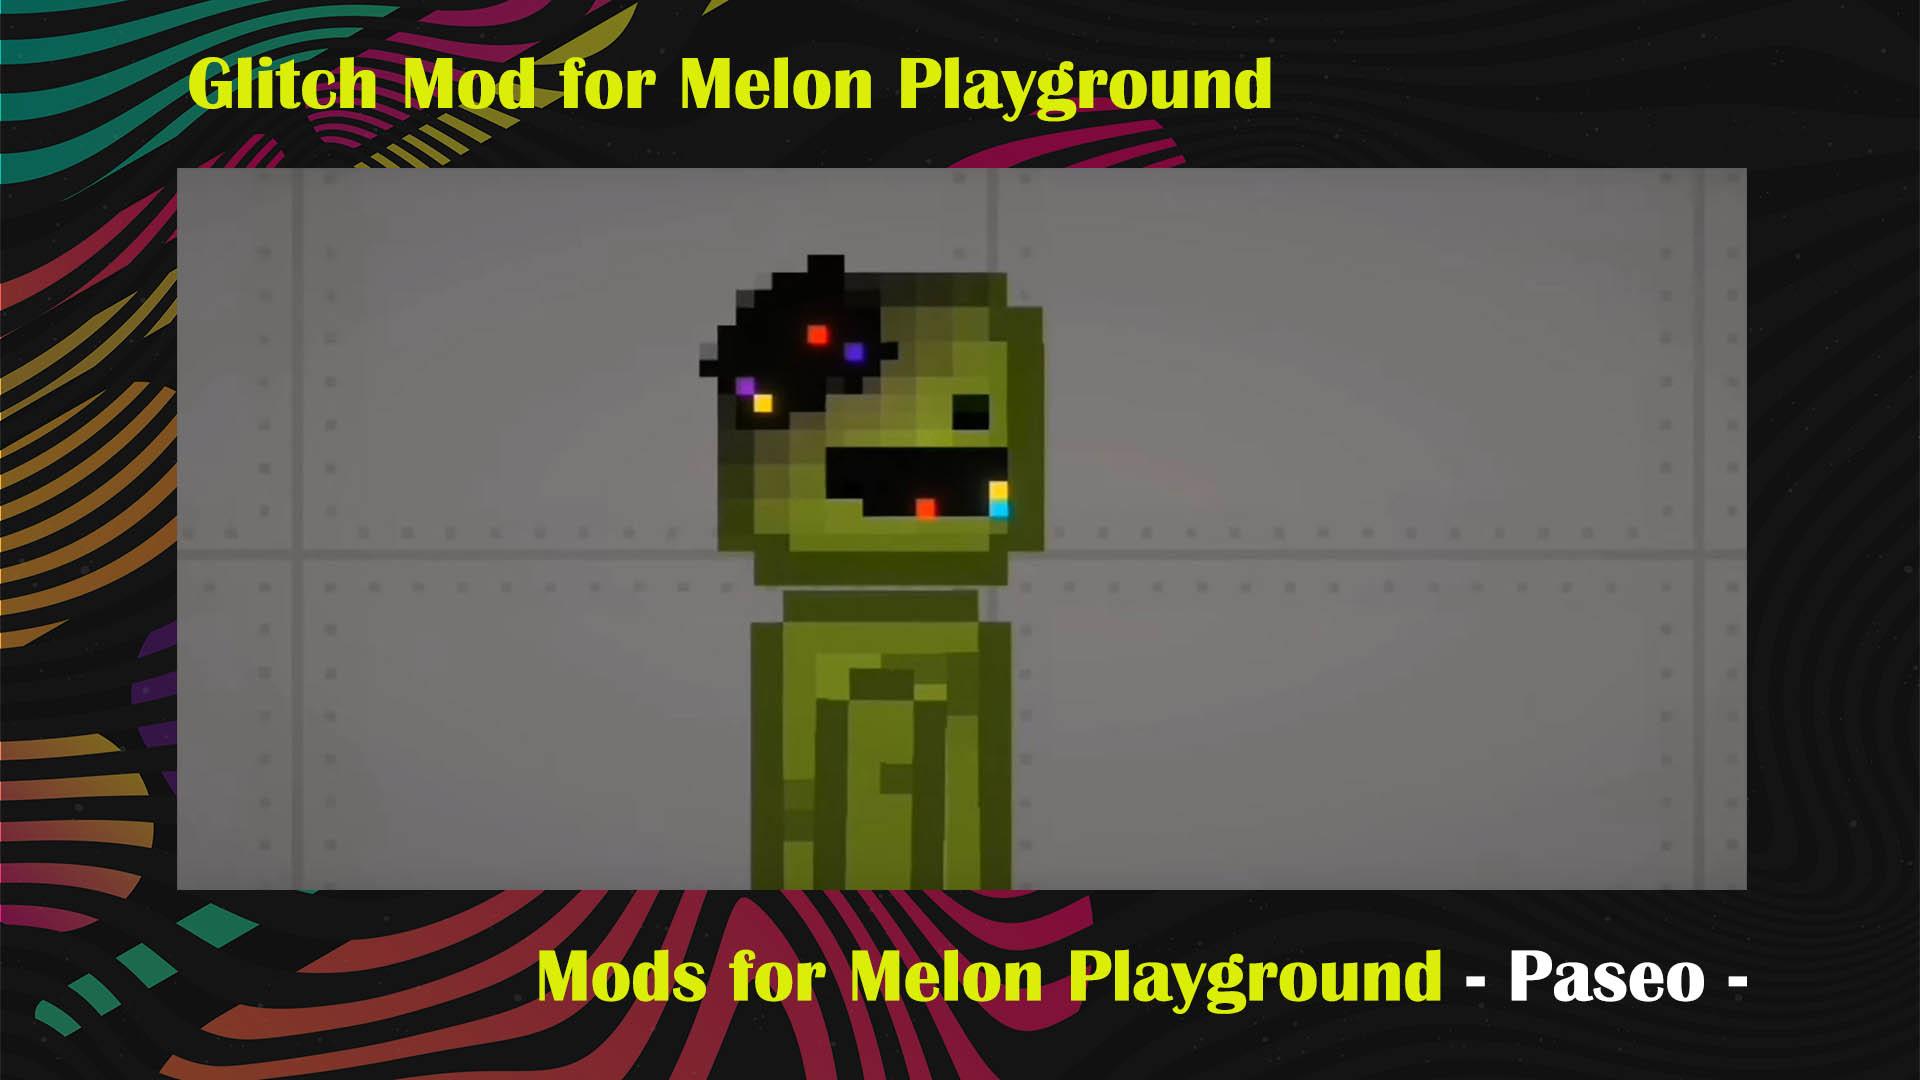 How to Download Mods for Melon Playground